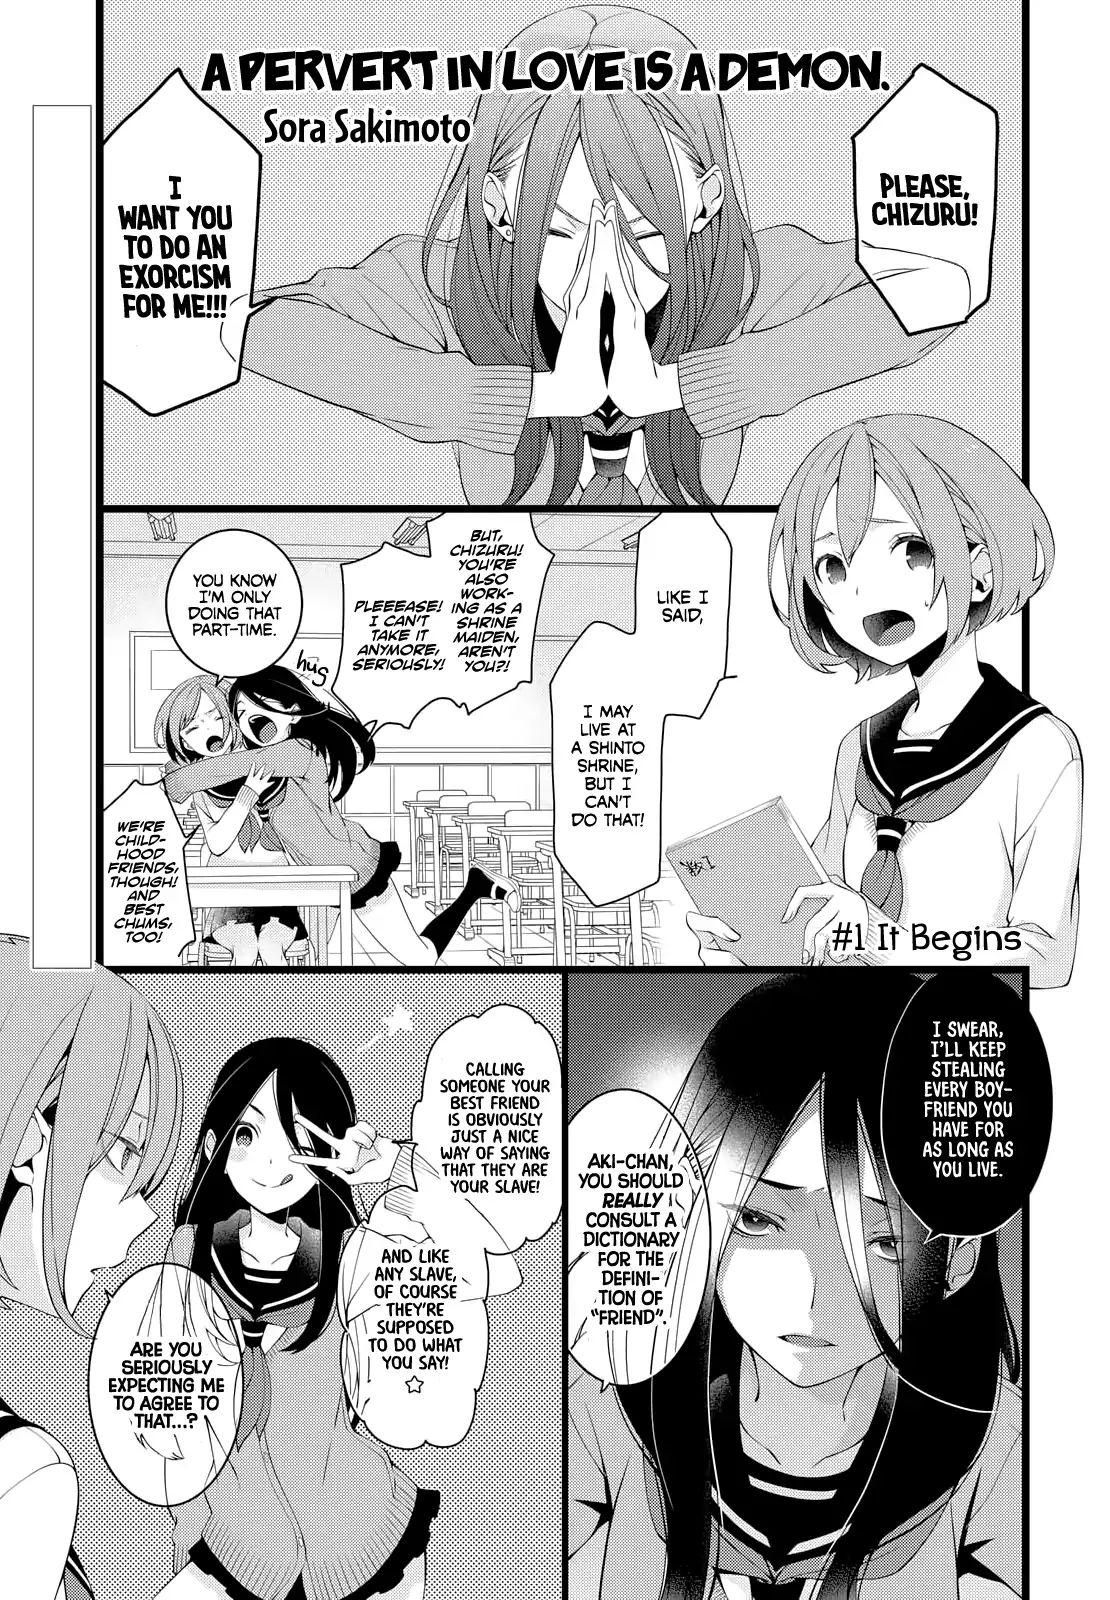 A Pervert In Love Is A Demon. Vol.1 Chapter 1: It Begins - Picture 2